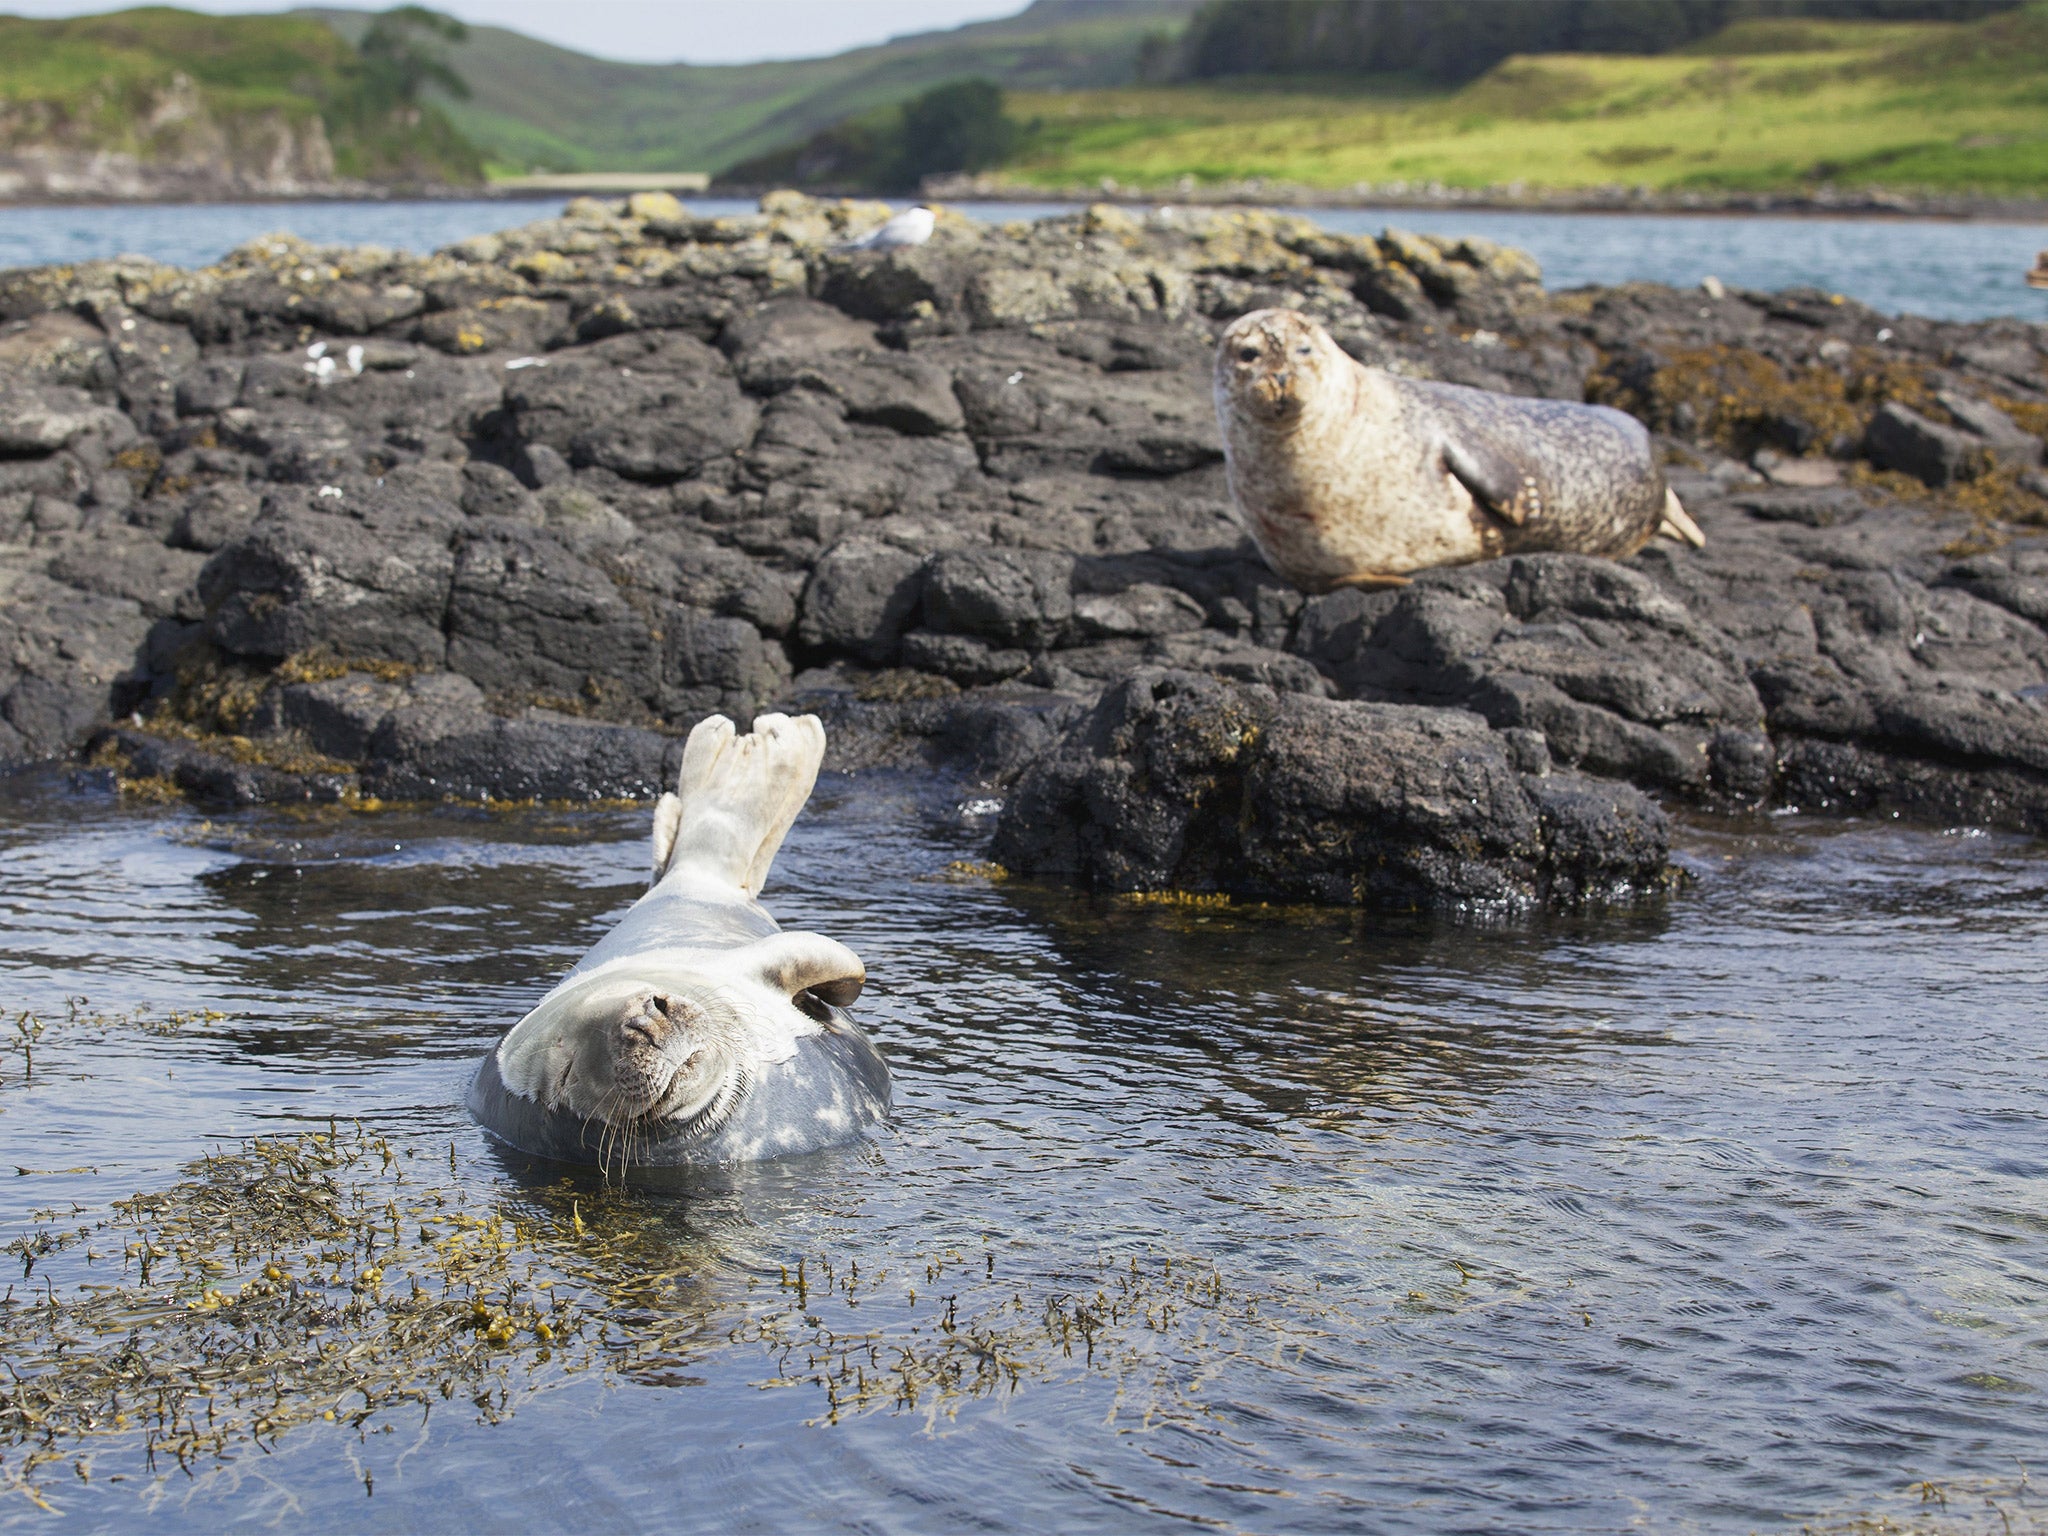 The farm that supplies M&amp;S shot a total of 56 seals 2013-14, more than any other Scottish farm. File photo (Rex)